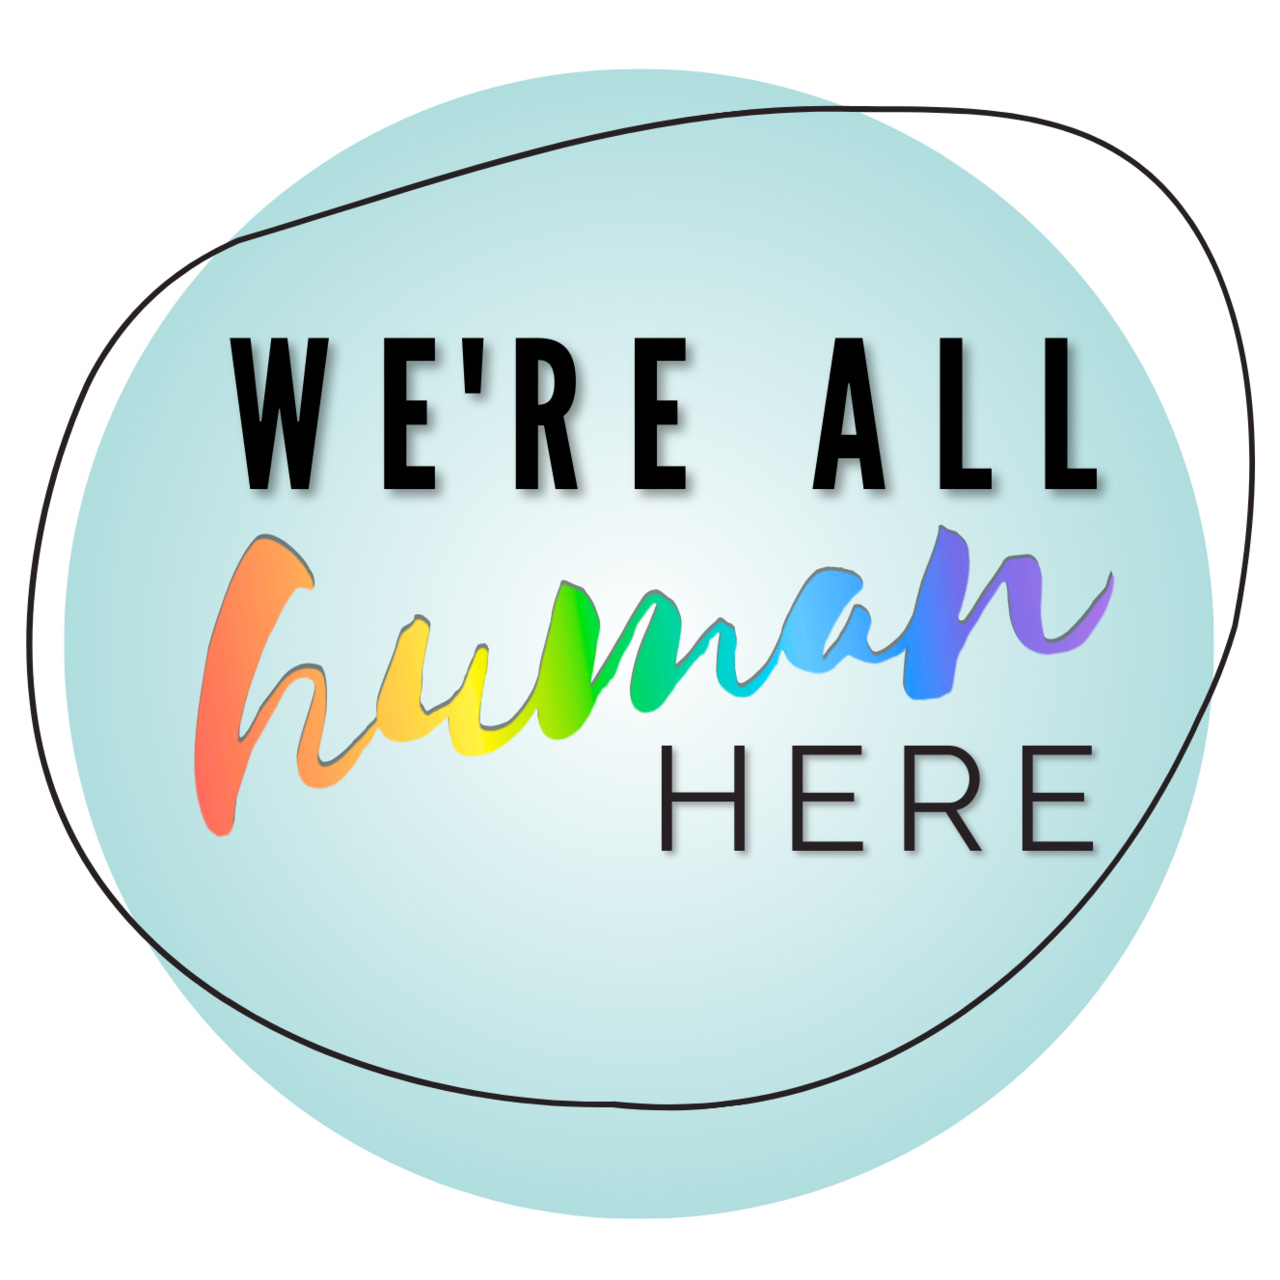 Artwork for We're All Human Here's Substack